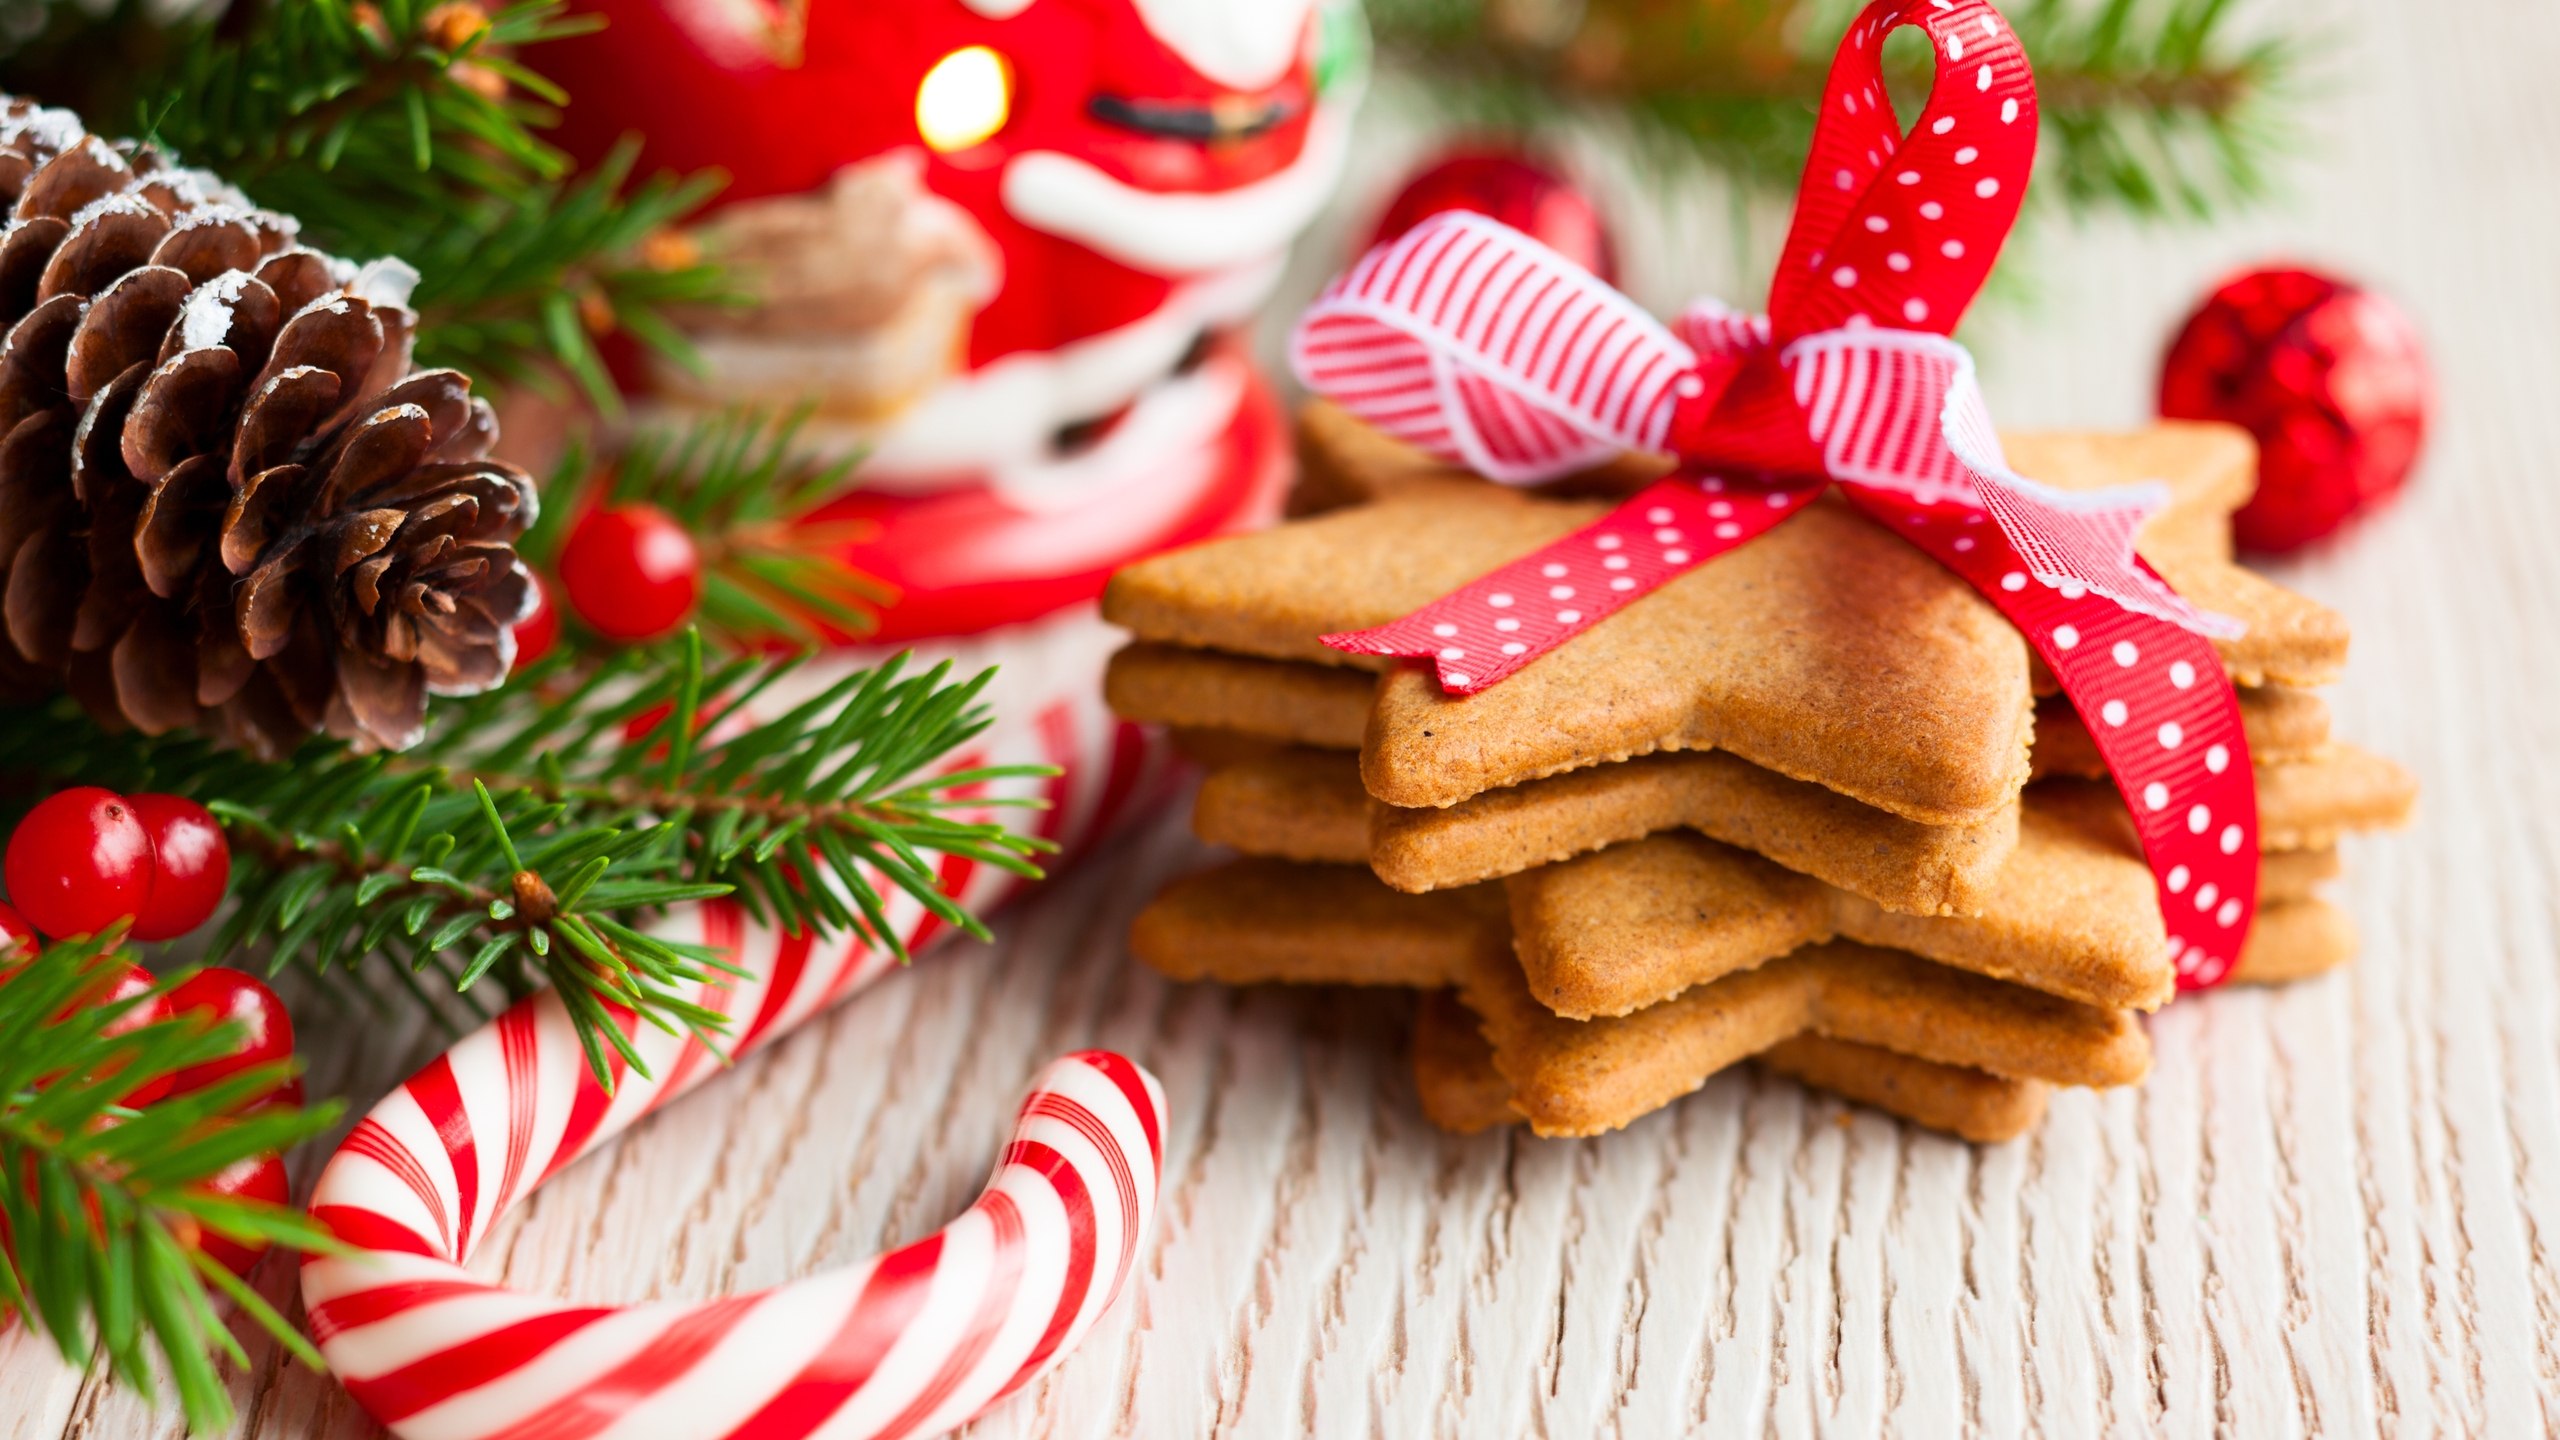 Special Christmas Cookies for 2560x1440 HDTV resolution